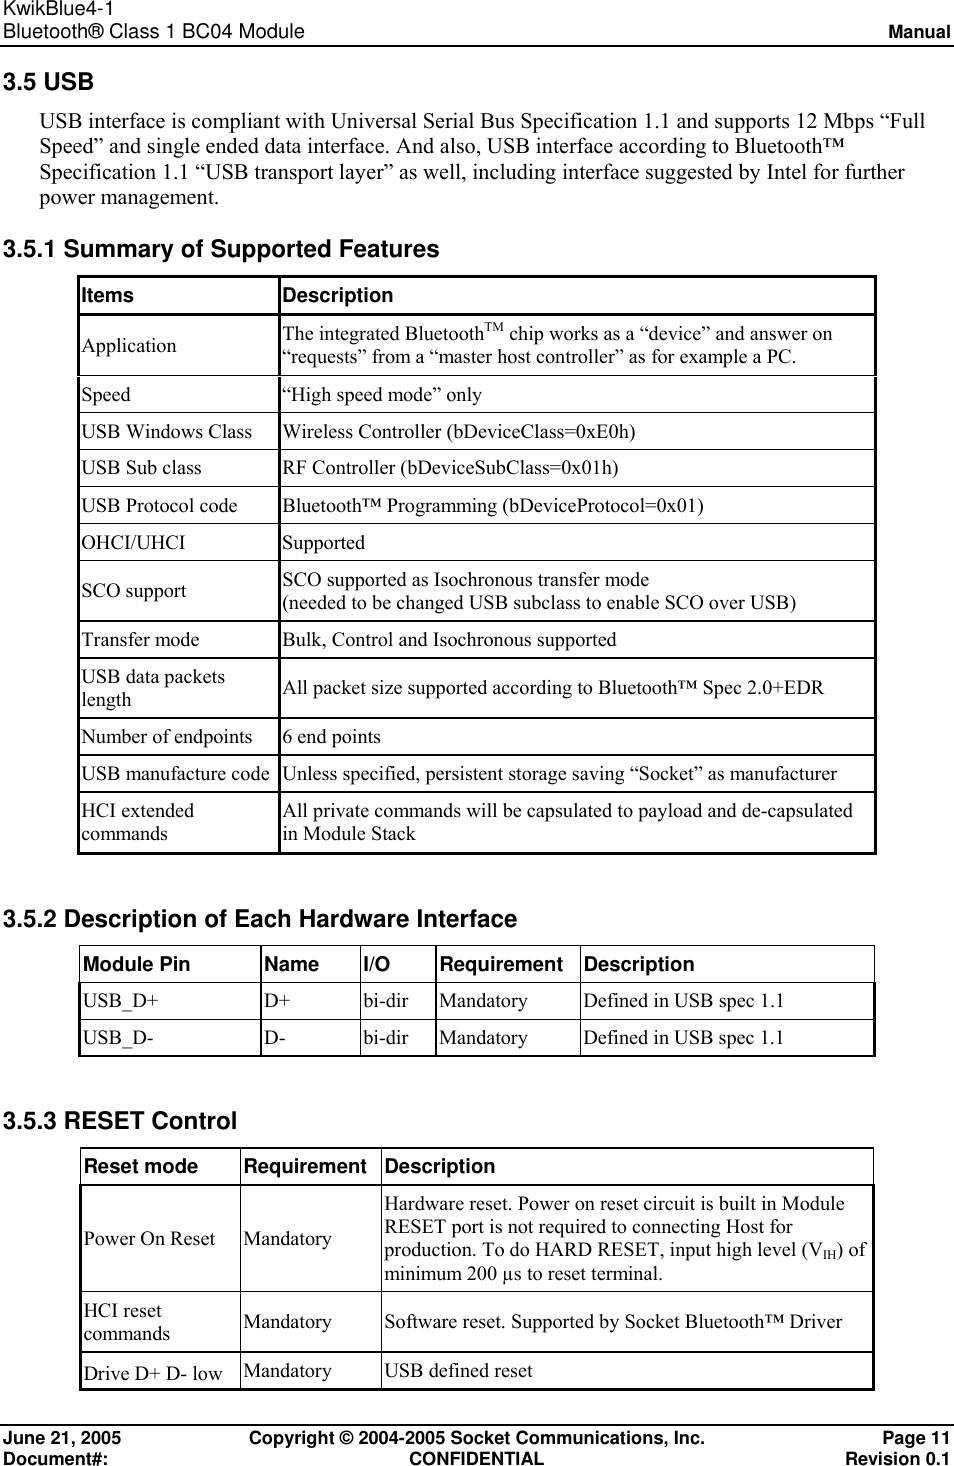 KwikBlue4-1  Bluetooth® Class 1 BC04 Module Manual  June 21, 2005  Copyright © 2004-2005 Socket Communications, Inc.  Page 11 Document#: CONFIDENTIAL Revision 0.1 3.5 USB USB interface is compliant with Universal Serial Bus Specification 1.1 and supports 12 Mbps “Full Speed” and single ended data interface. And also, USB interface according to Bluetooth™ Specification 1.1 “USB transport layer” as well, including interface suggested by Intel for further power management. 3.5.1 Summary of Supported Features Items Description Application  The integrated BluetoothTM chip works as a “device” and answer on “requests” from a “master host controller” as for example a PC. Speed  “High speed mode” only USB Windows Class  Wireless Controller (bDeviceClass=0xE0h) USB Sub class  RF Controller (bDeviceSubClass=0x01h) USB Protocol code  Bluetooth™ Programming (bDeviceProtocol=0x01) OHCI/UHCI Supported SCO support  SCO supported as Isochronous transfer mode  (needed to be changed USB subclass to enable SCO over USB) Transfer mode  Bulk, Control and Isochronous supported USB data packets length  All packet size supported according to Bluetooth™ Spec 2.0+EDR Number of endpoints   6 end points USB manufacture code  Unless specified, persistent storage saving “Socket” as manufacturer HCI extended commands All private commands will be capsulated to payload and de-capsulated in Module Stack  3.5.2 Description of Each Hardware Interface Module Pin  Name  I/O  Requirement Description USB_D+   D+  bi-dir  Mandatory  Defined in USB spec 1.1 USB_D-  D-  bi-dir  Mandatory  Defined in USB spec 1.1  3.5.3 RESET Control Reset mode  Requirement  Description Power On Reset  Mandatory Hardware reset. Power on reset circuit is built in Module RESET port is not required to connecting Host for production. To do HARD RESET, input high level (VIH) of minimum 200 µs to reset terminal.  HCI reset commands  Mandatory  Software reset. Supported by Socket Bluetooth™ Driver Drive D+ D- low  Mandatory  USB defined reset 